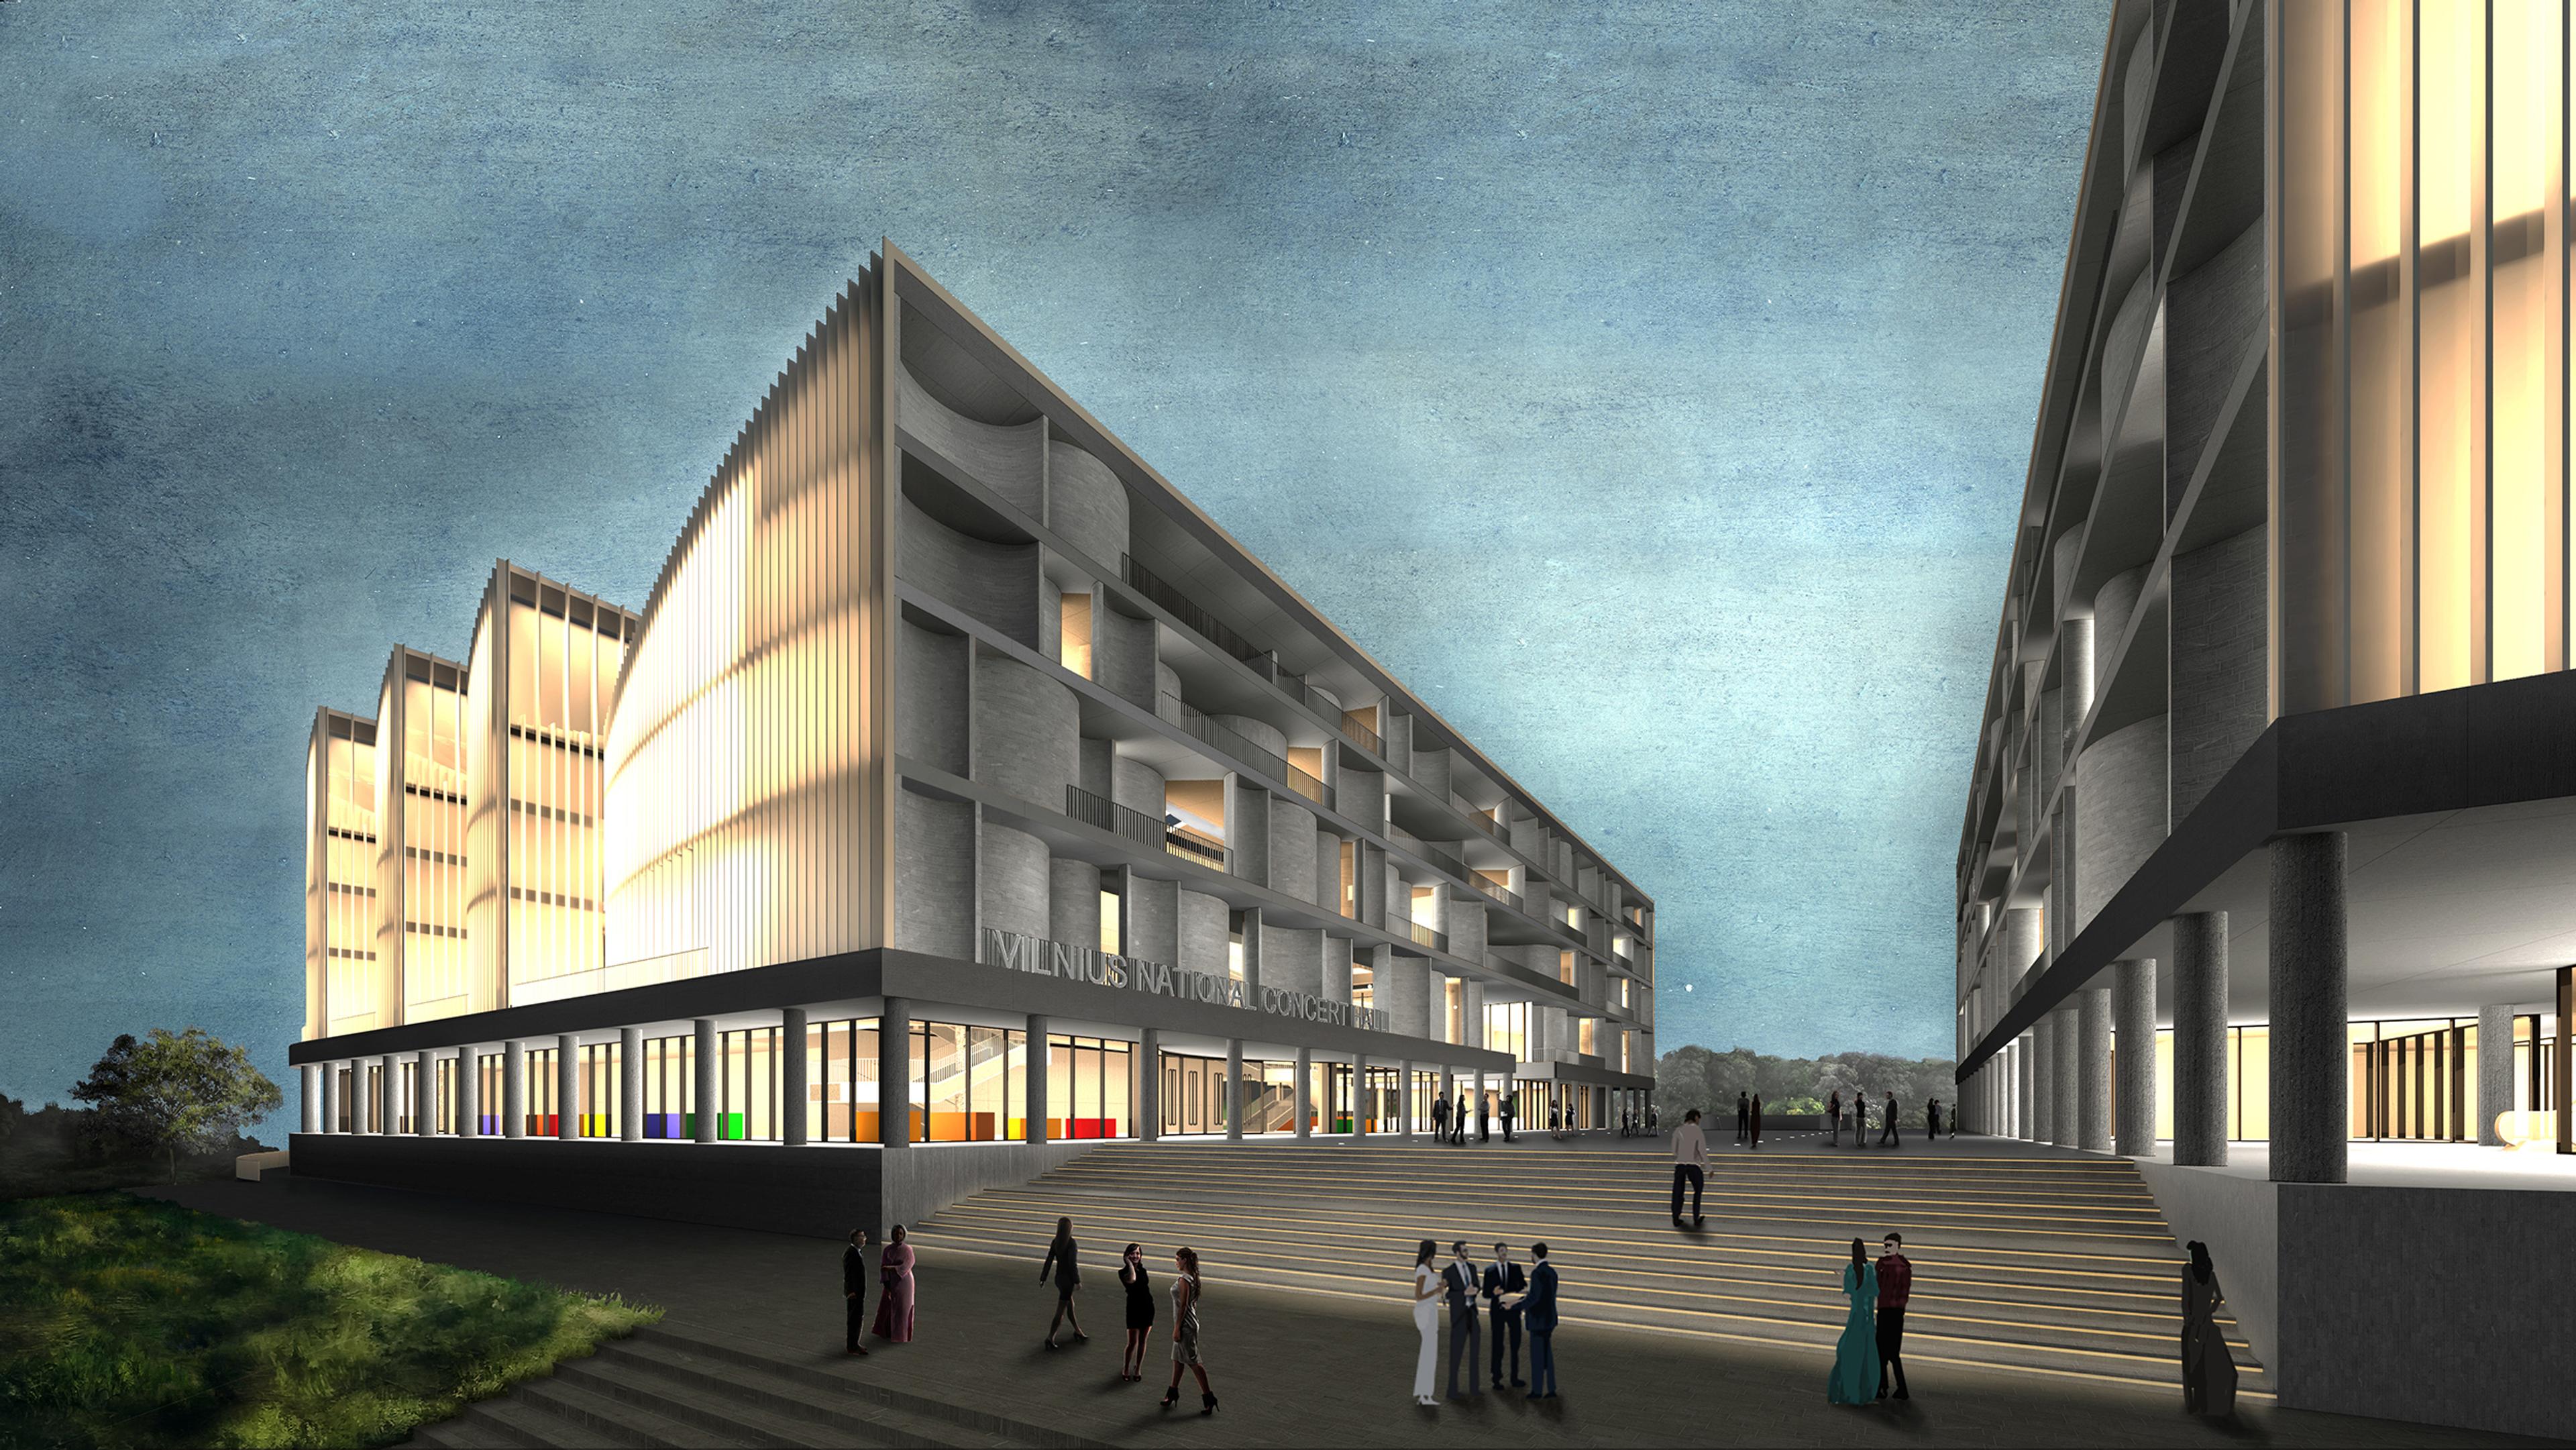 architectural rendering of courtyard of proposed vilnius national concert hall at night